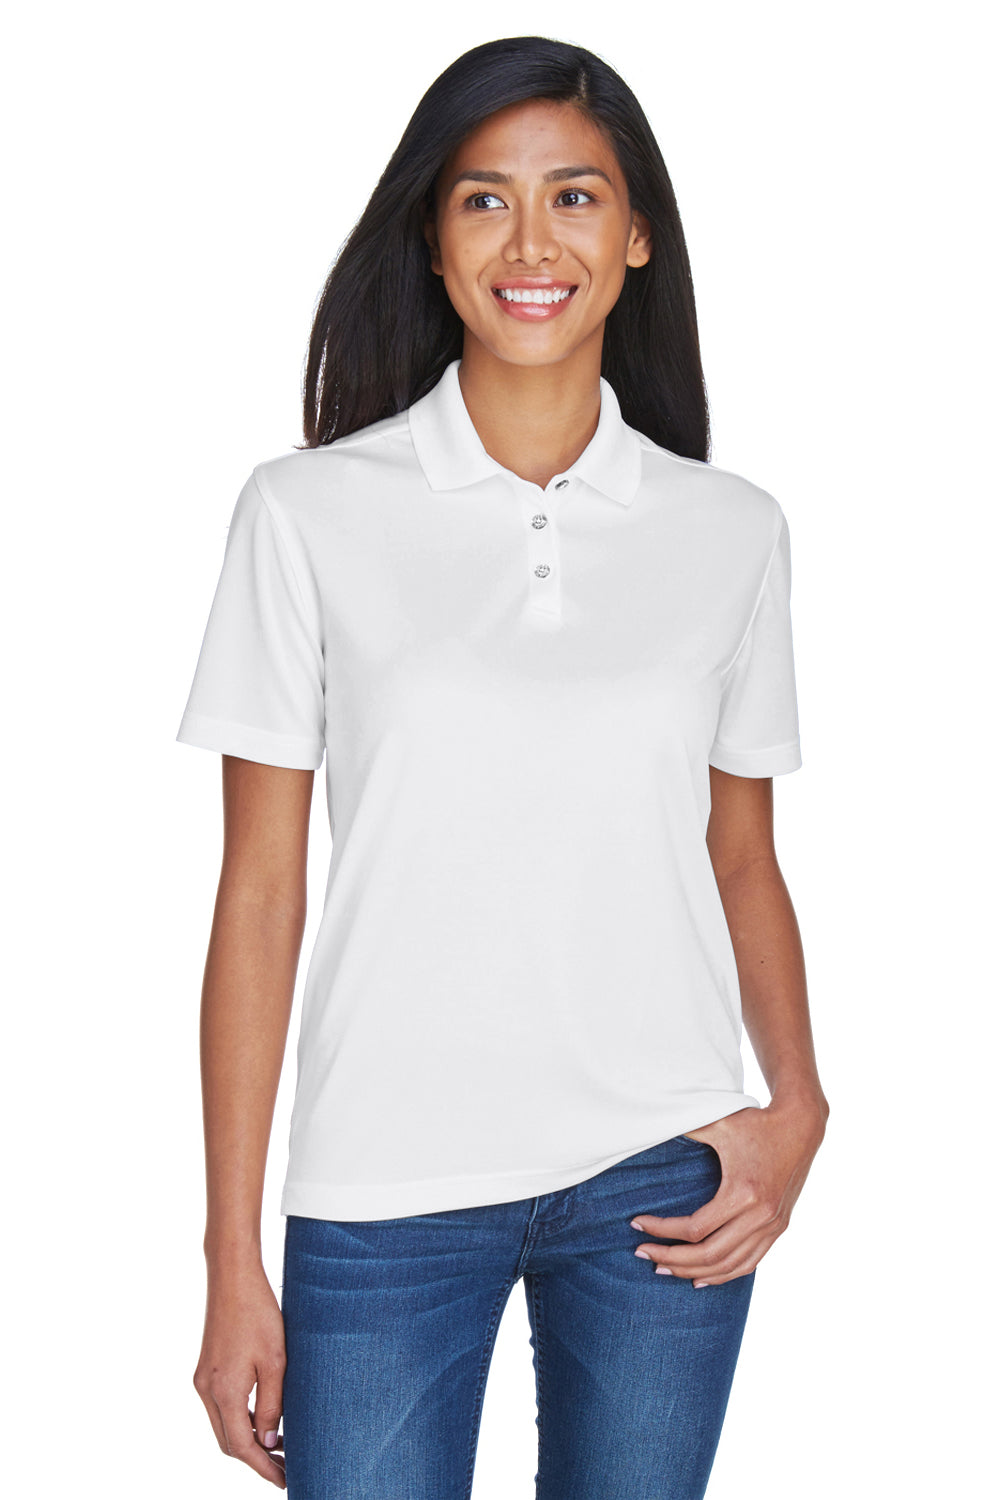 UltraClub 8404 Womens Cool & Dry Moisture Wicking Short Sleeve Polo Shirt White Front